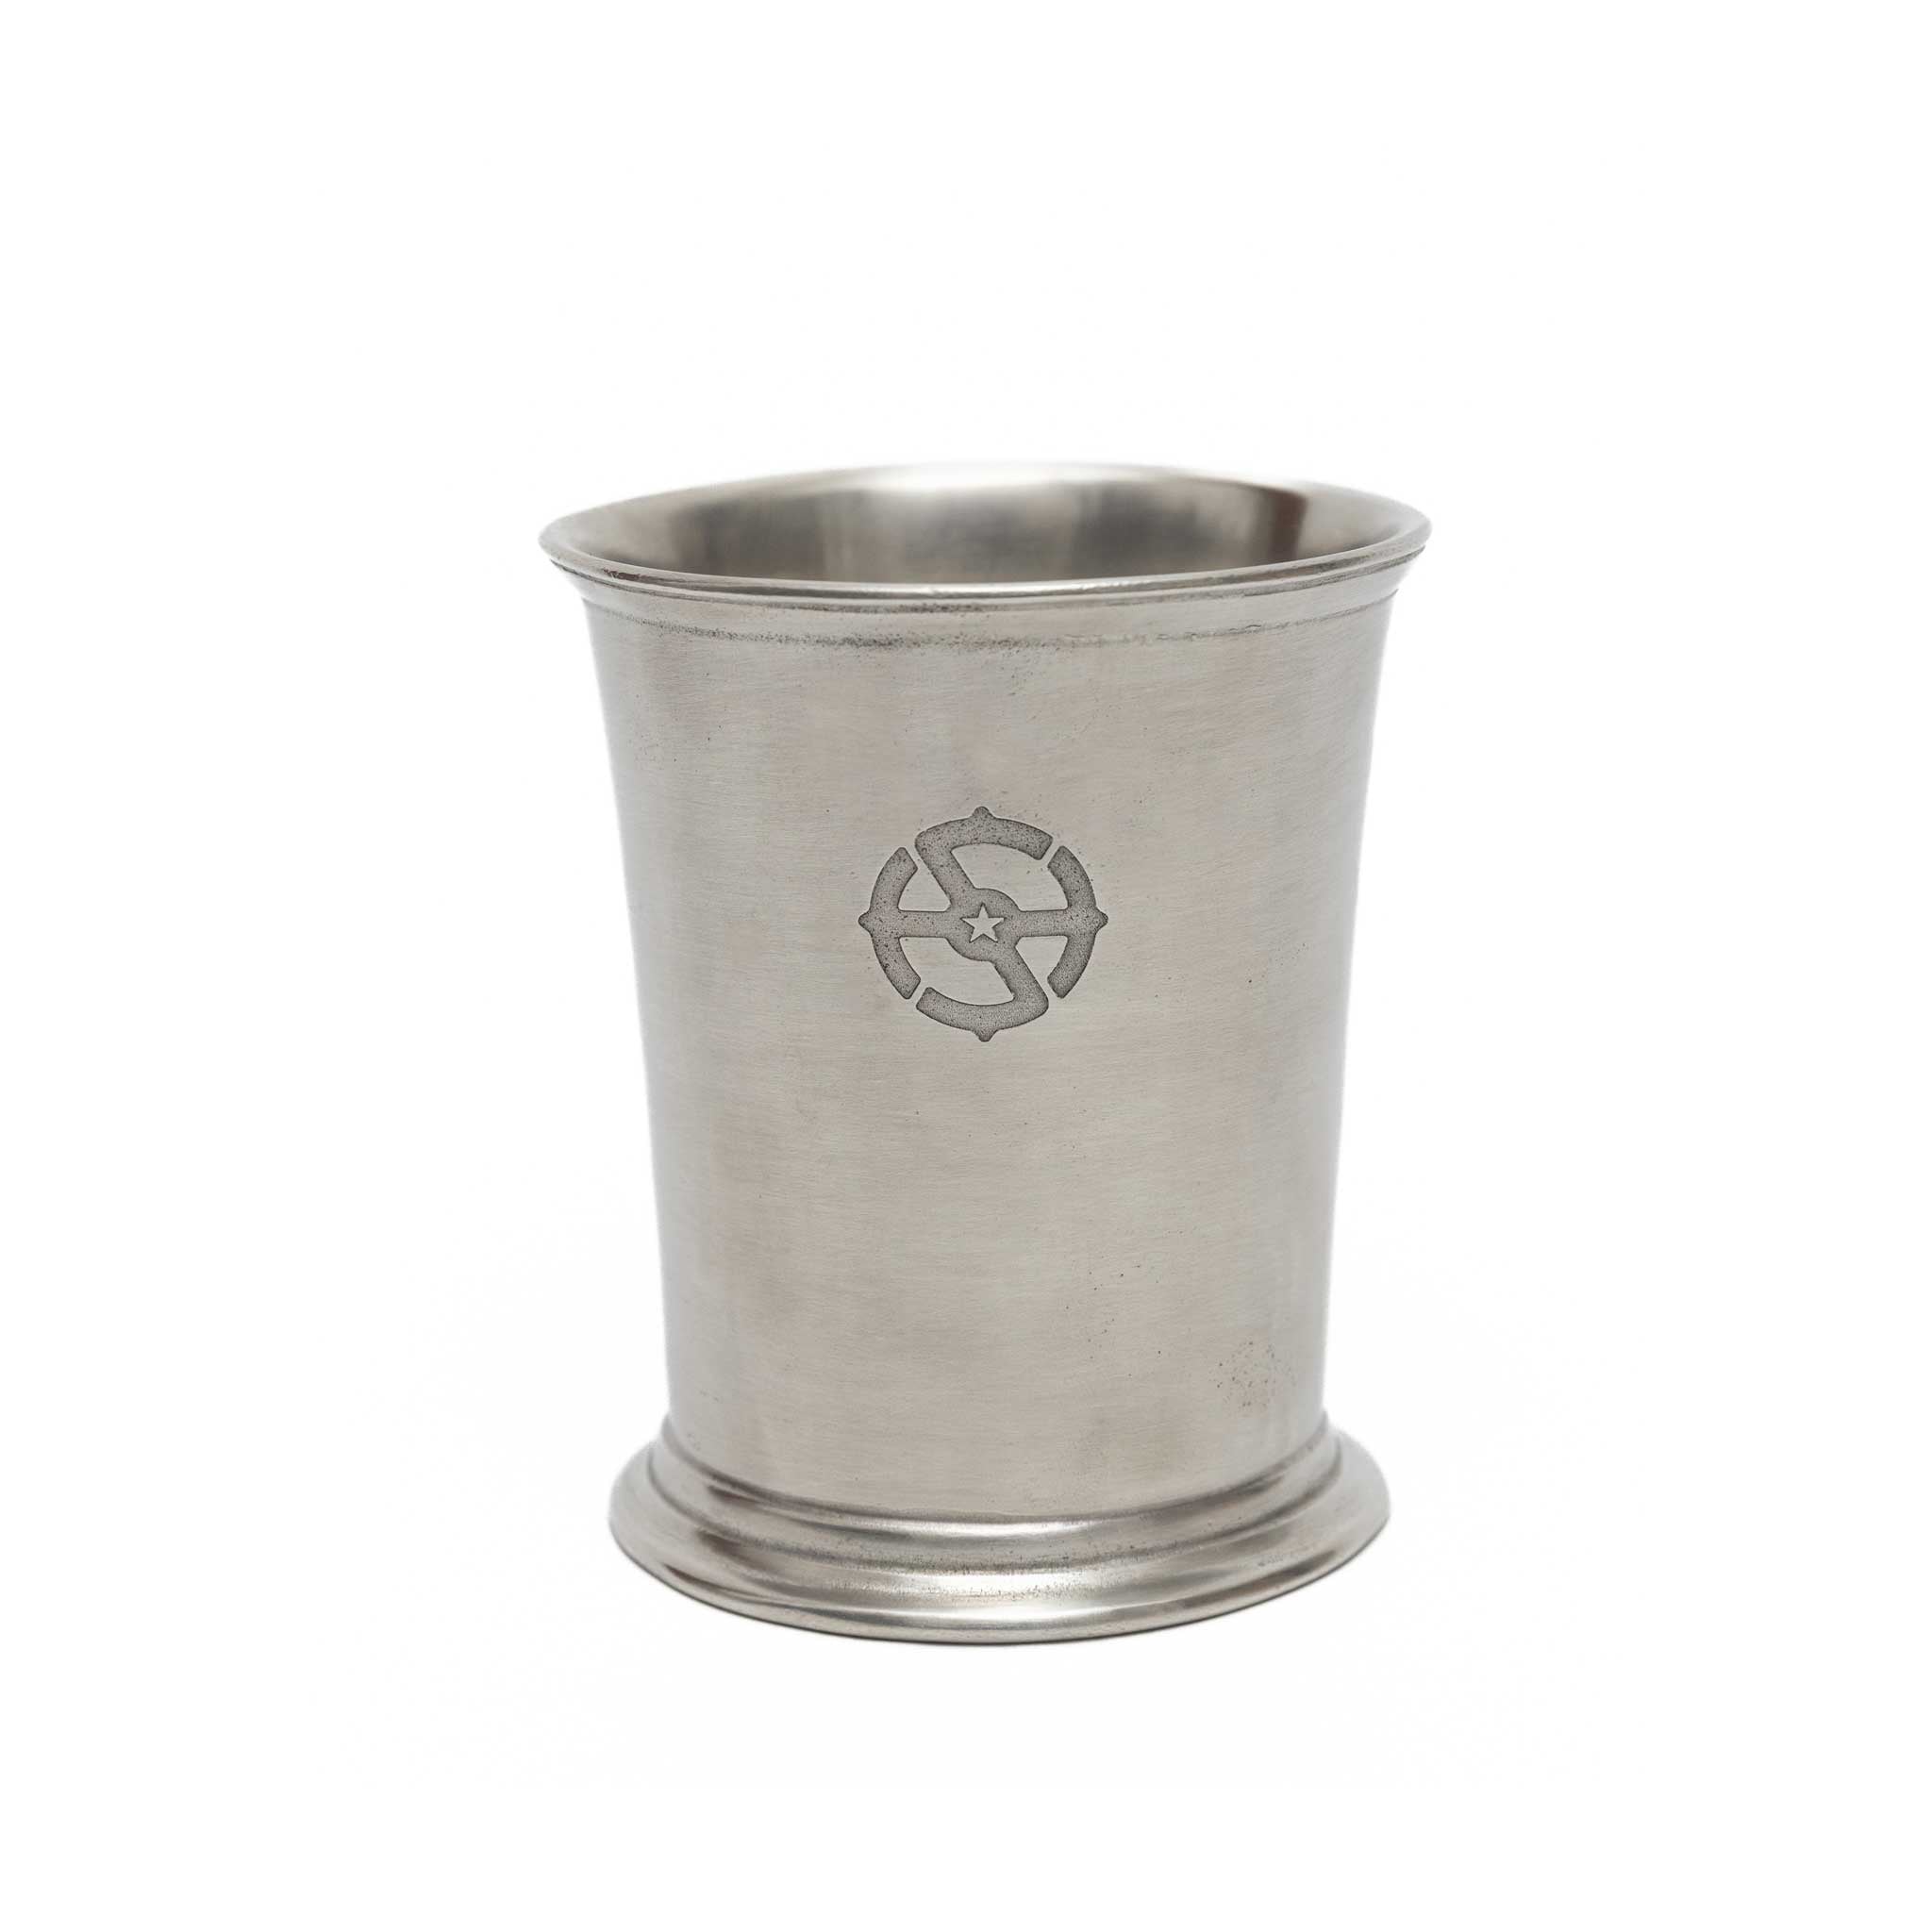 Julep Cup by MATCH Pewter & Safe Harbor Shop